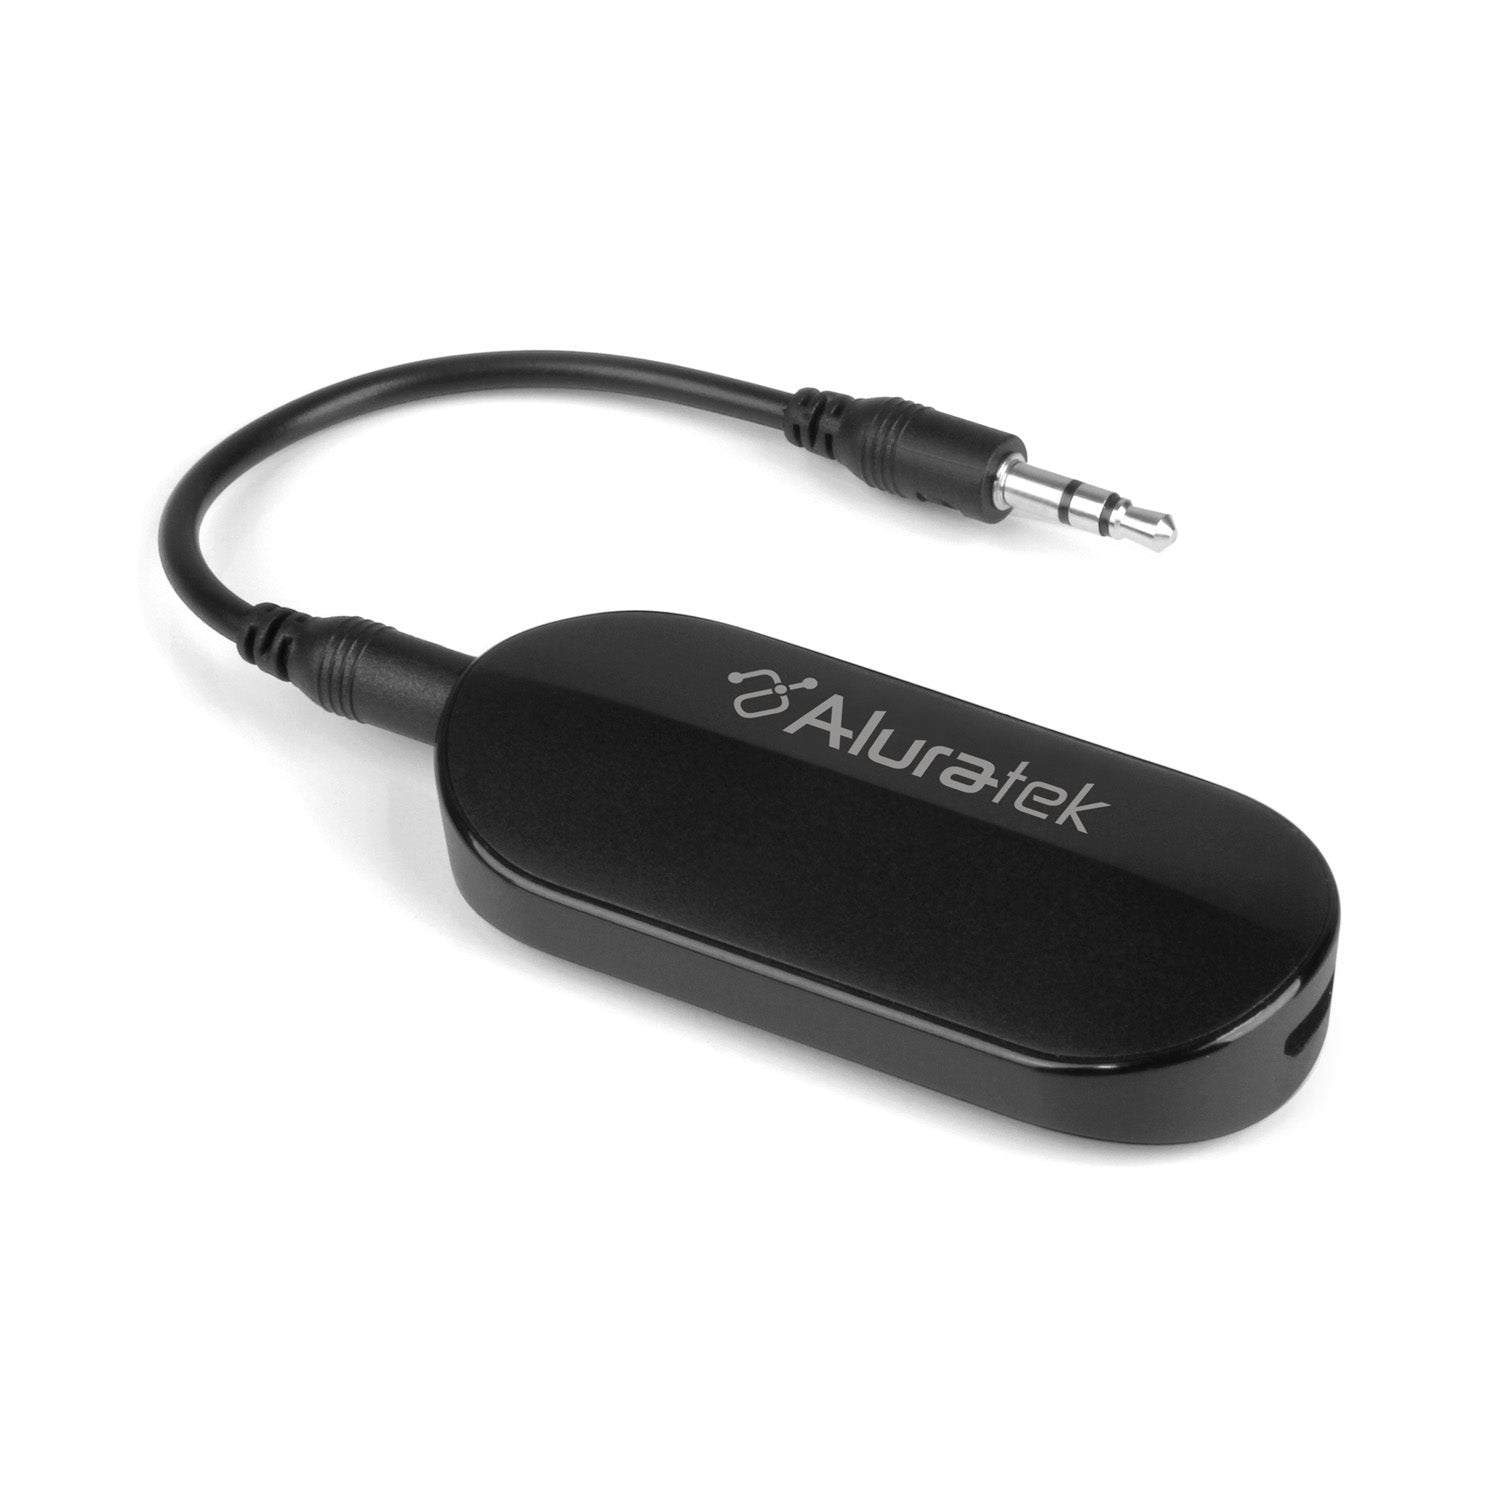 This Bluetooth Audio Transmitter Is Traveler-loved